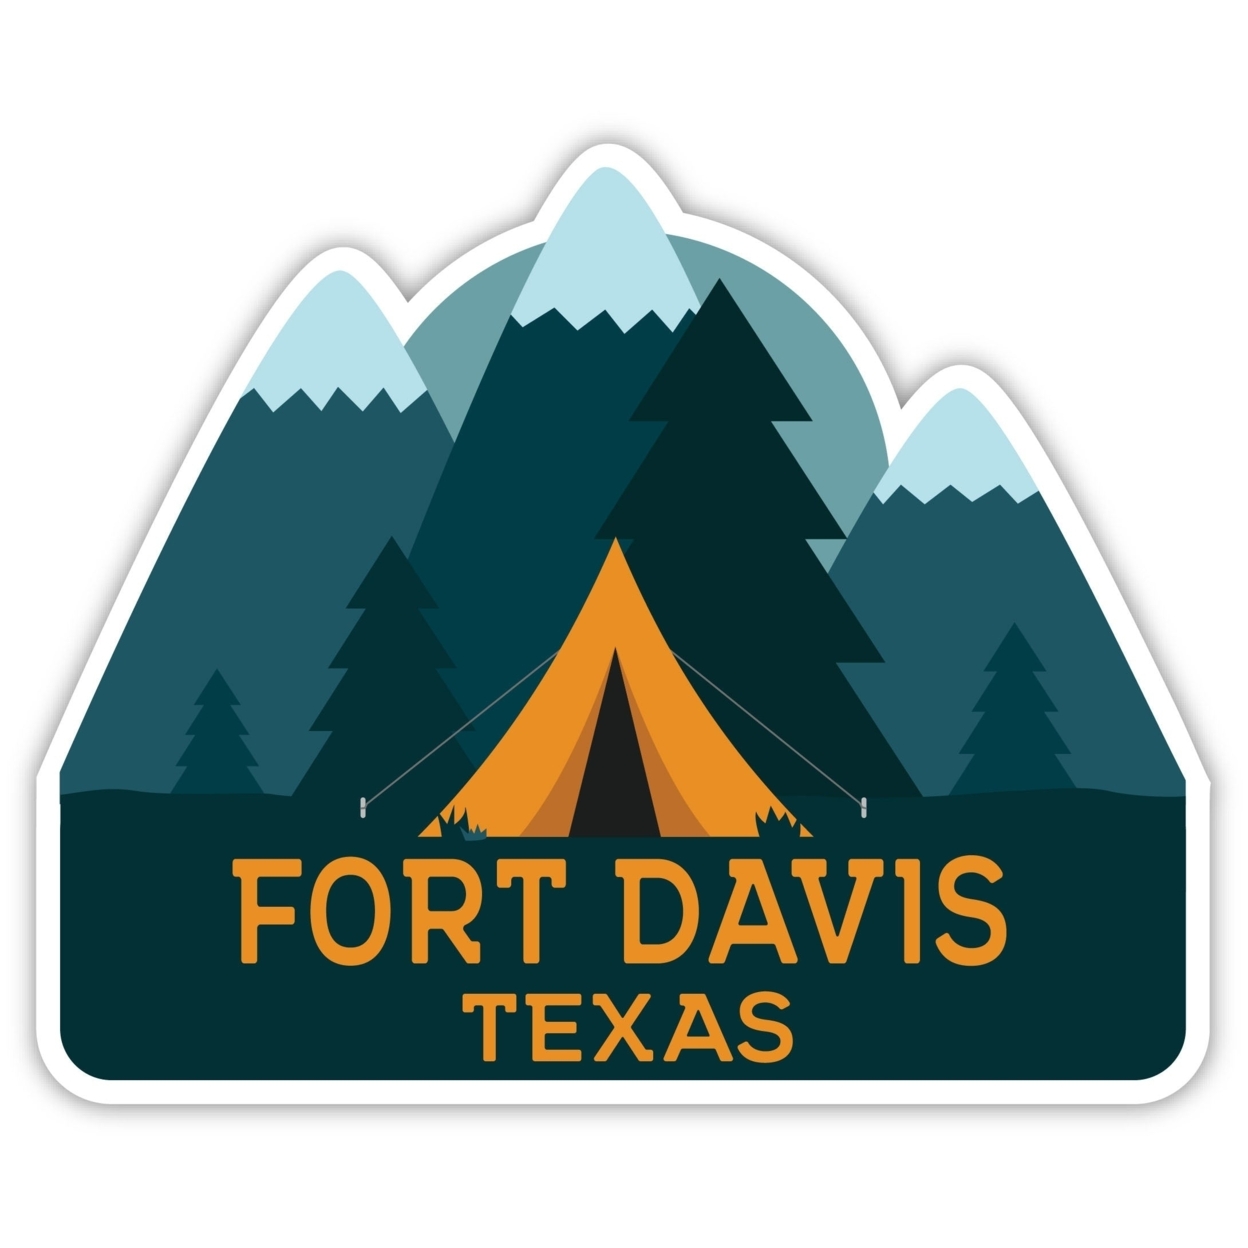 Fort Davis Texas Souvenir Decorative Stickers (Choose Theme And Size) - Single Unit, 10-Inch, Great Outdoors